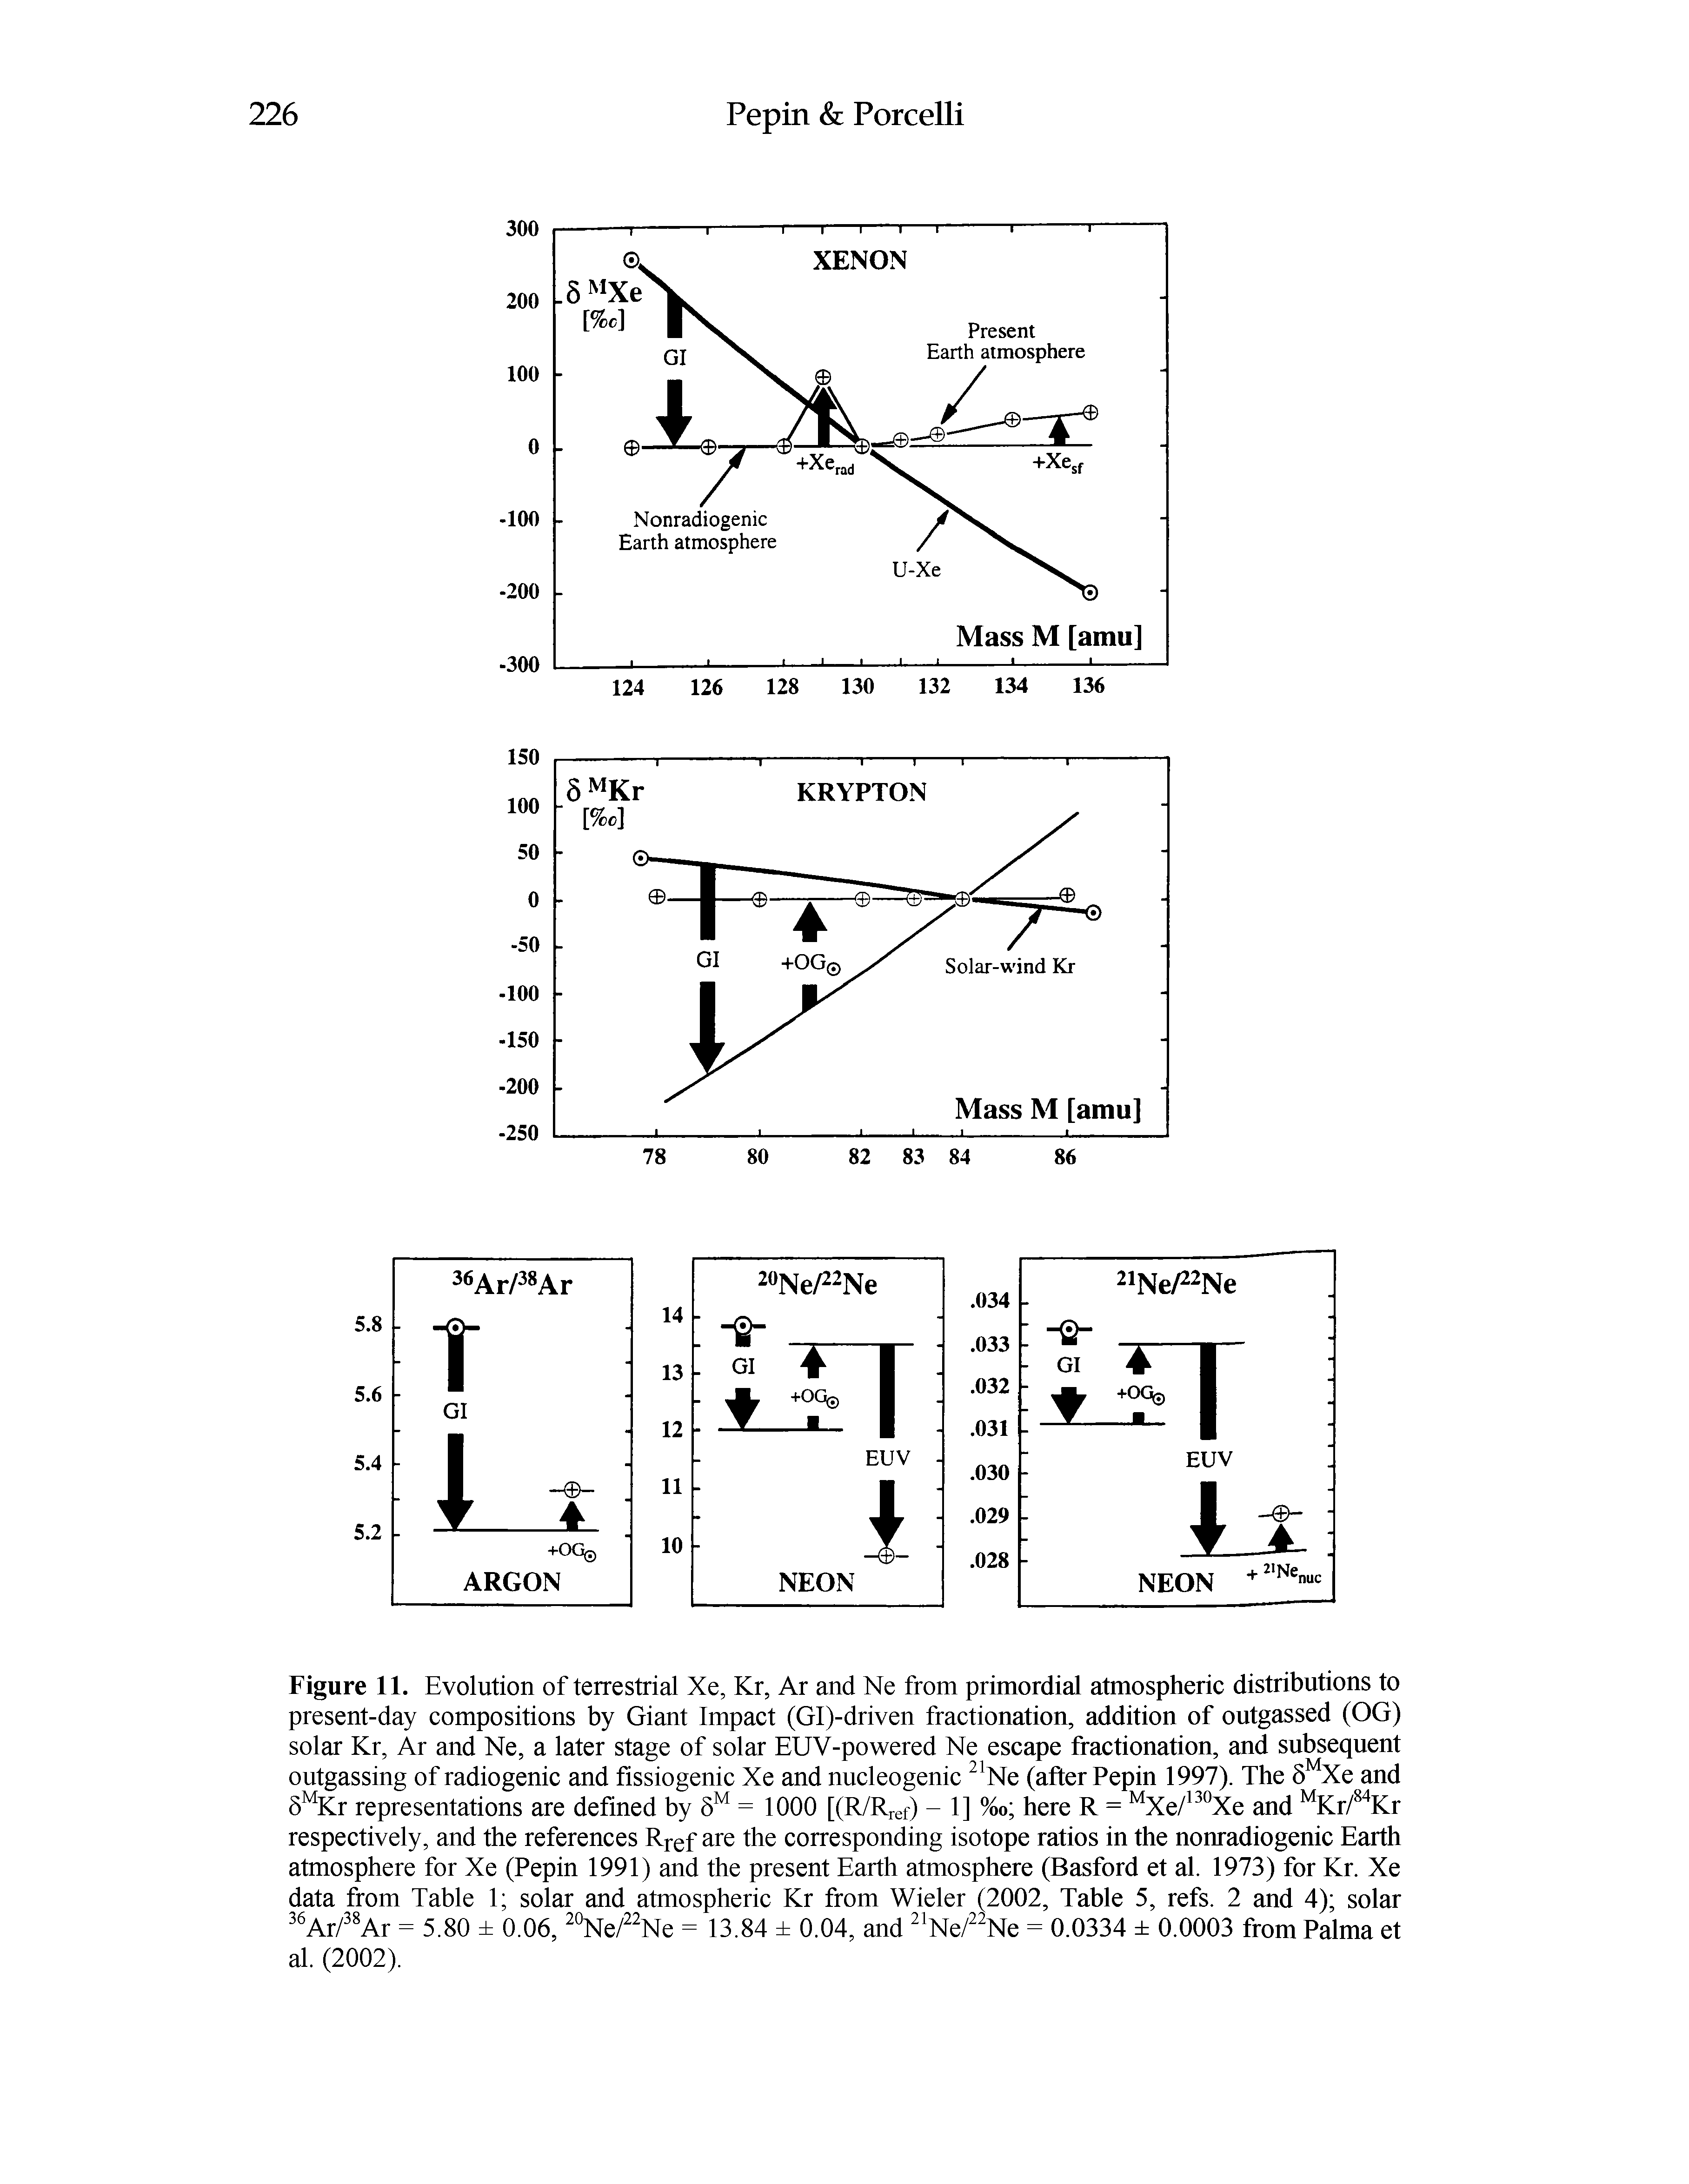 Figure 11. Evolution of terrestrial Xe, Kr, Ar and Ne from primordial atmospheric distributions to present-day compositions by Giant Impact (Gl)-driven fractionation, addition of outgassed (OG) solar Kr, Ar and Ne, a later stage of solar EUV-powered Ne escape fractionation, and subsequent outgassing of radiogenic and fissiogenic Xe and nucleogenic Ne (after Pepin 1997). The 6 Xe and 5 Kr representations are defined by 5 = 1000 [(R/Rref) - 1] %o here R = Xe/ °Xe and Kr/ Kr respectively, and the references Rj-ef are the corresponding isotope ratios in the nonradiogenic Earth atmosphere for Xe (Pepin 1991) and the present Earth atmosphere (Basford et al. 1973) for Kr. Xe data from Table 1 solar and atmospheric Kr from Wider (2002, Table 5, refs. 2 and 4) solar Ar/ Ar = 5.80 0.06, °Ne/ Ne = 13.84 0.04, and Ne/ Ne = 0.0334 0.0003 from Palma et al. (2002).